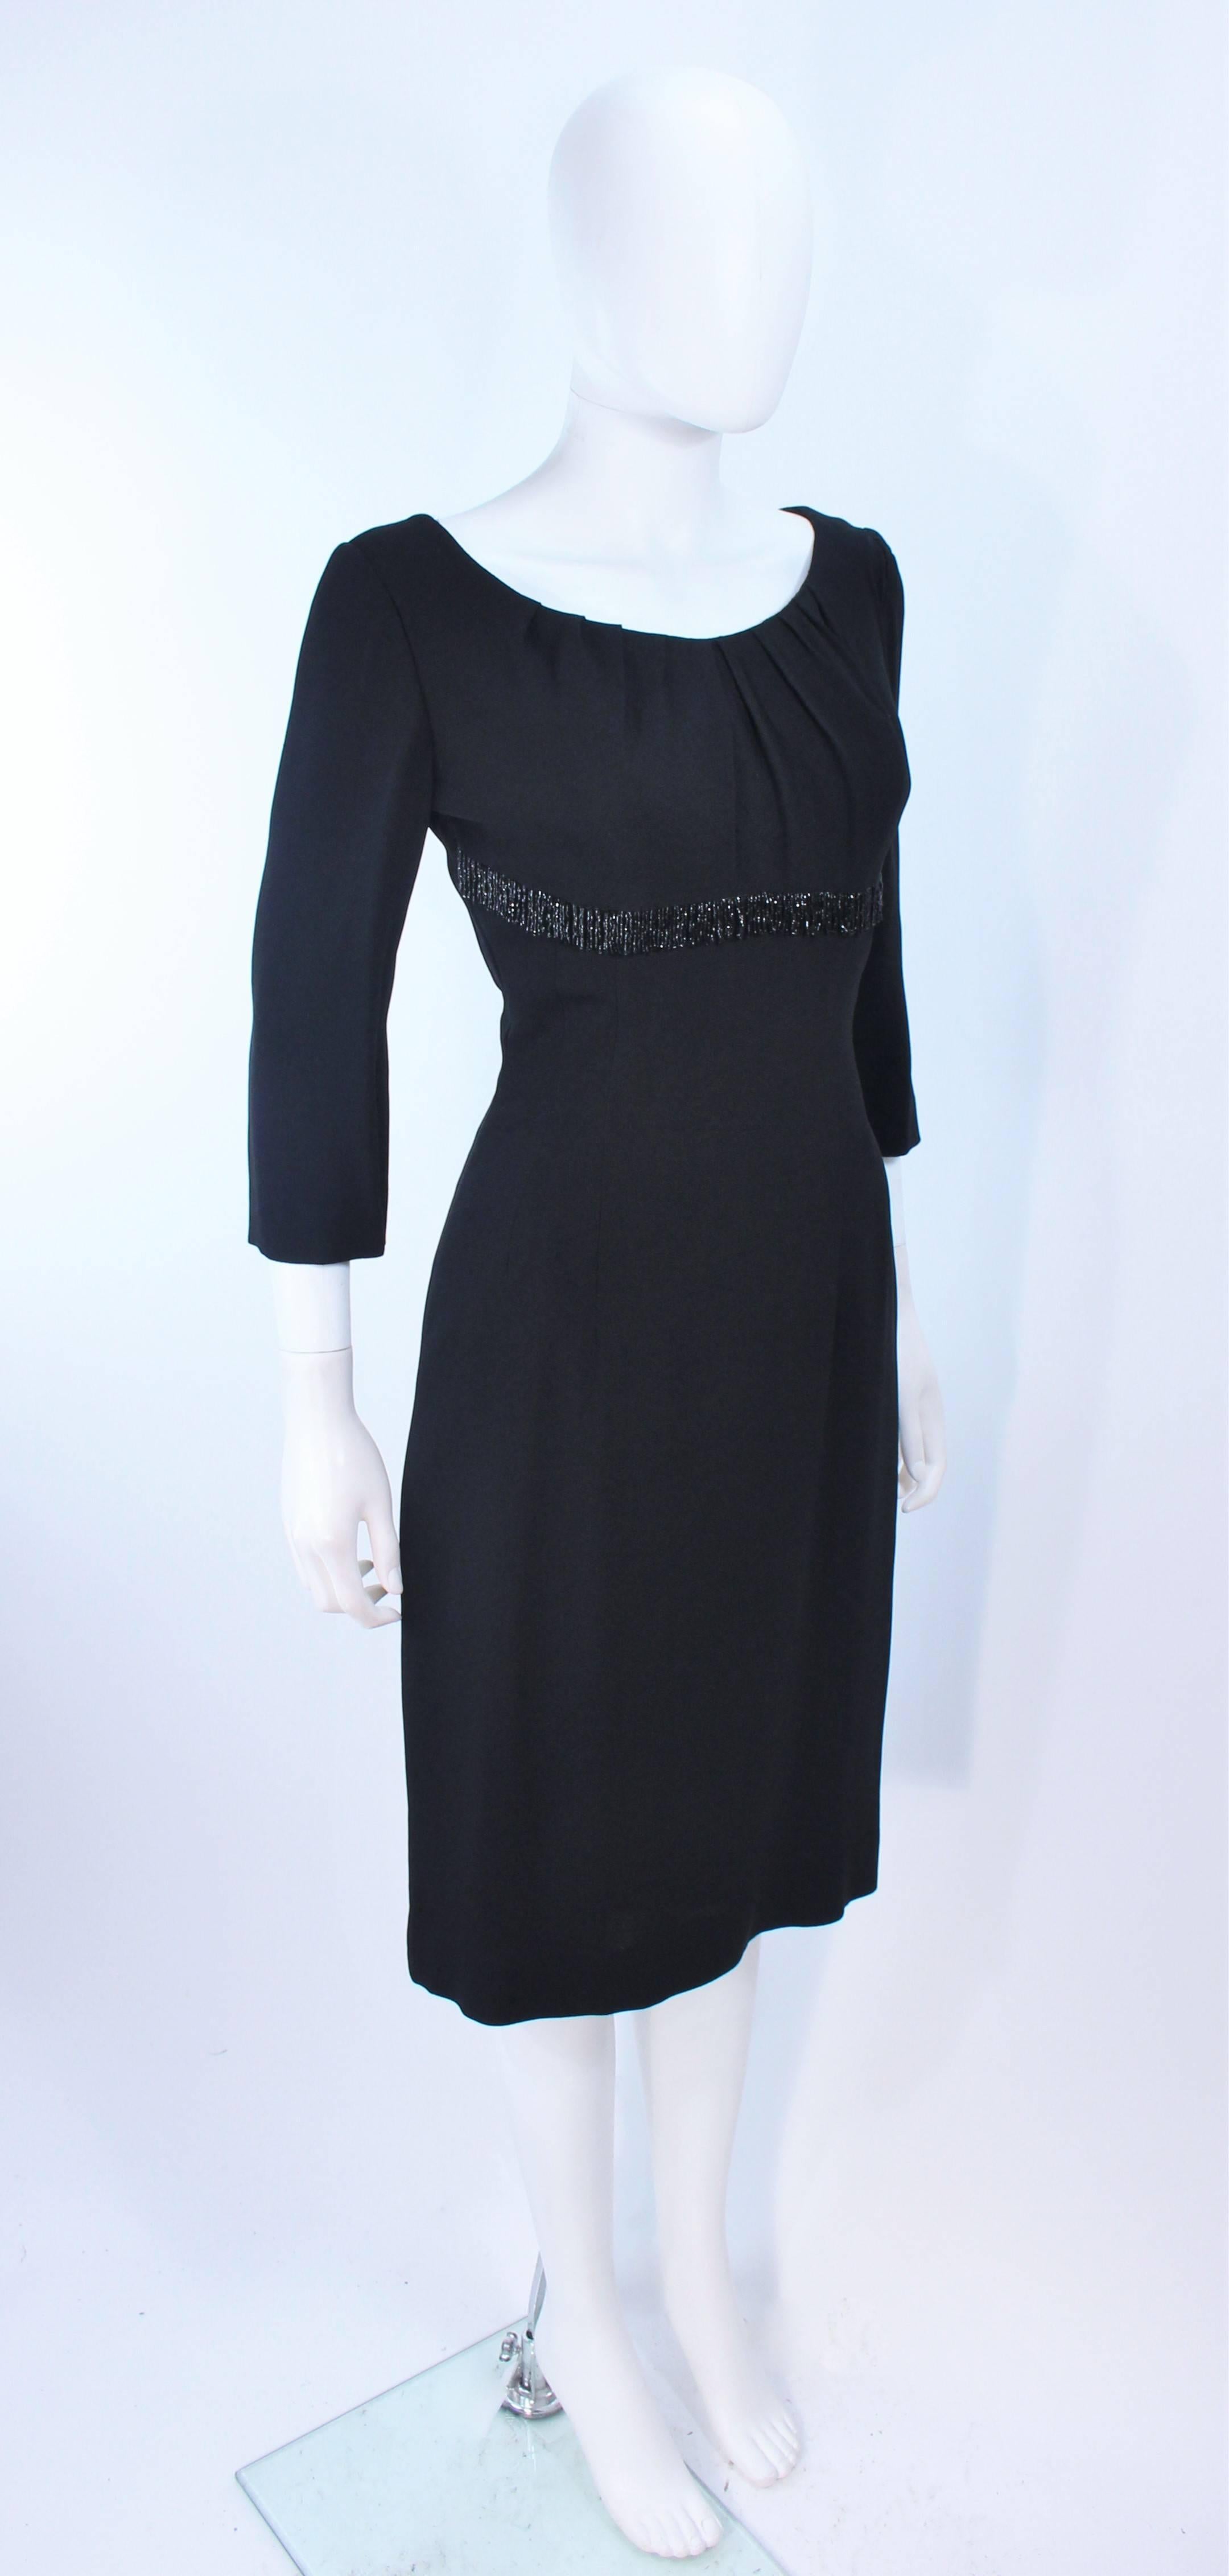 KAT DAUZIG Black Silk Crepe Cocktail Dress Beaded Size 2 4 In Excellent Condition For Sale In Los Angeles, CA